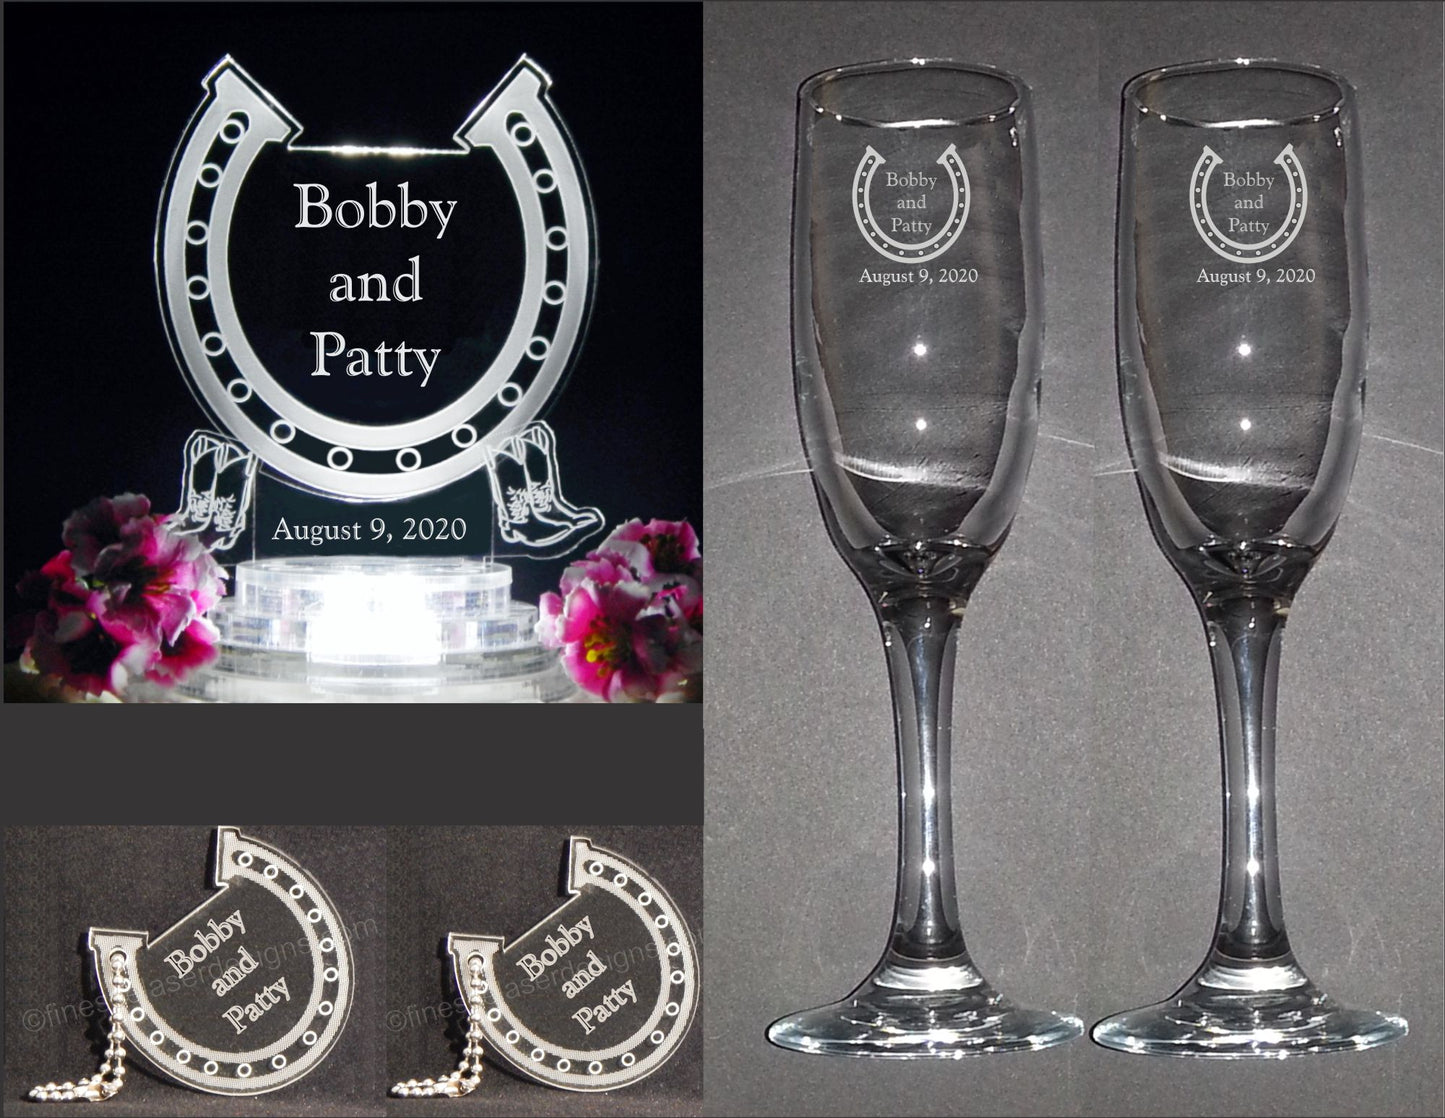 photo showing horseshoe shaped acrylic cake topper designed with a horseshoe design and engraved with names and date, two sizes of horseshoe keychains, and set of champagne flutes